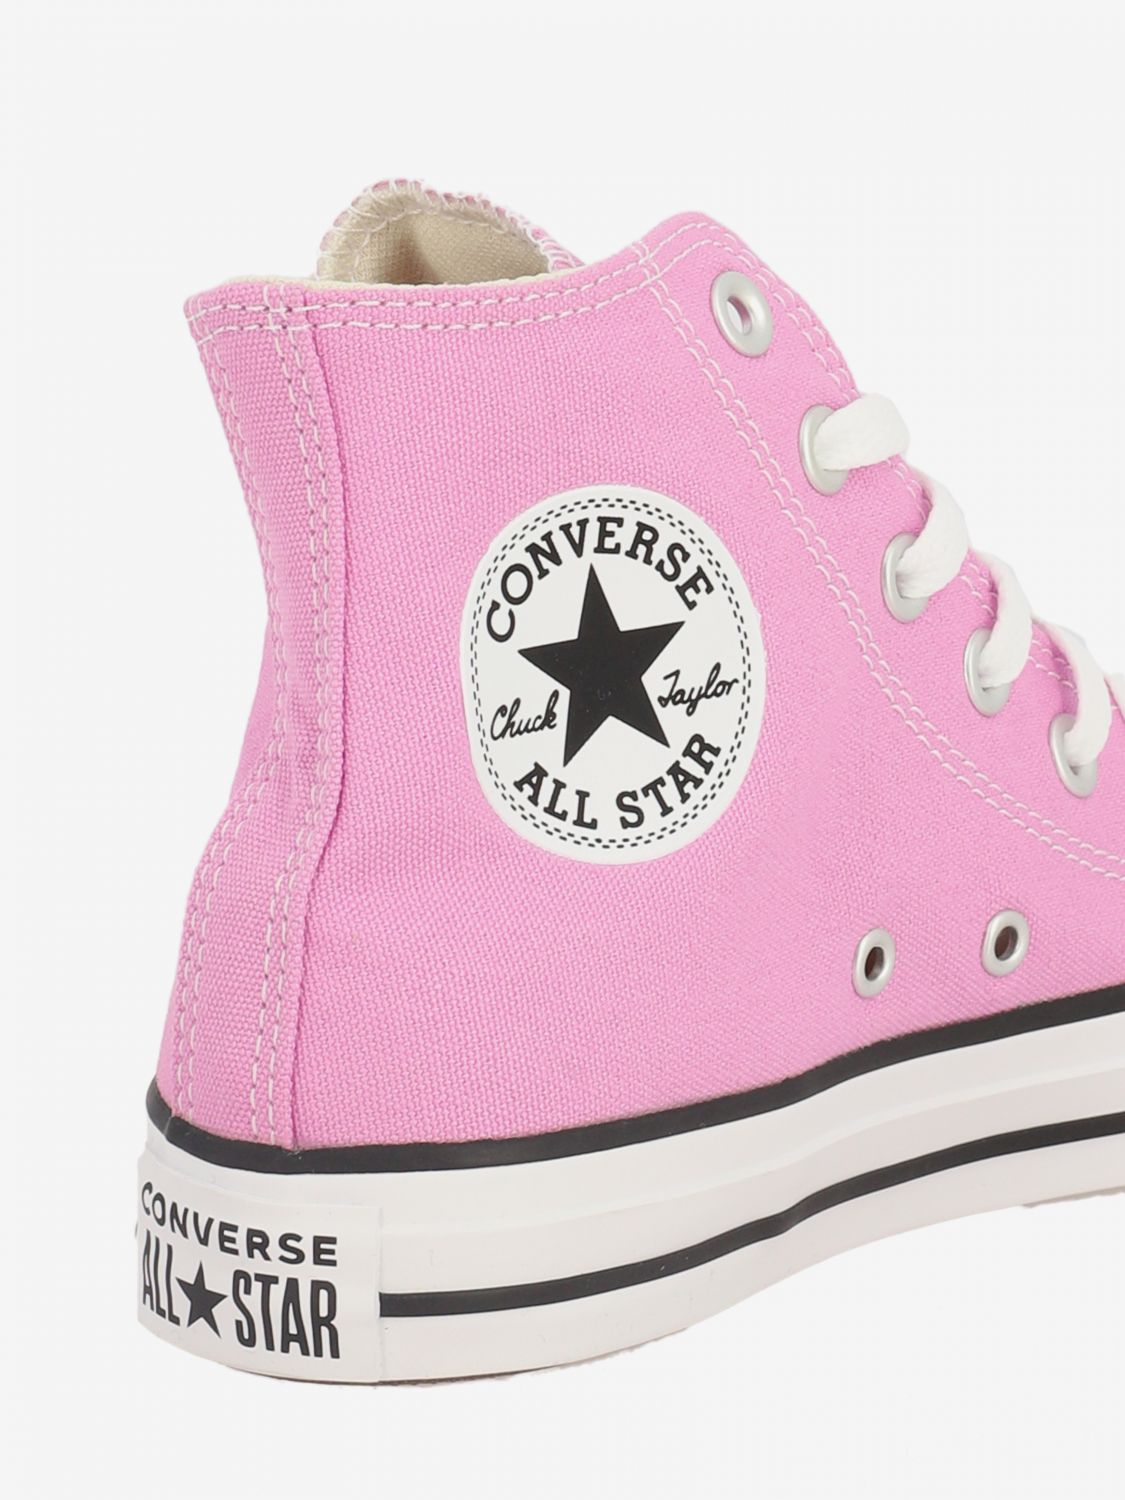 pink shoes converse